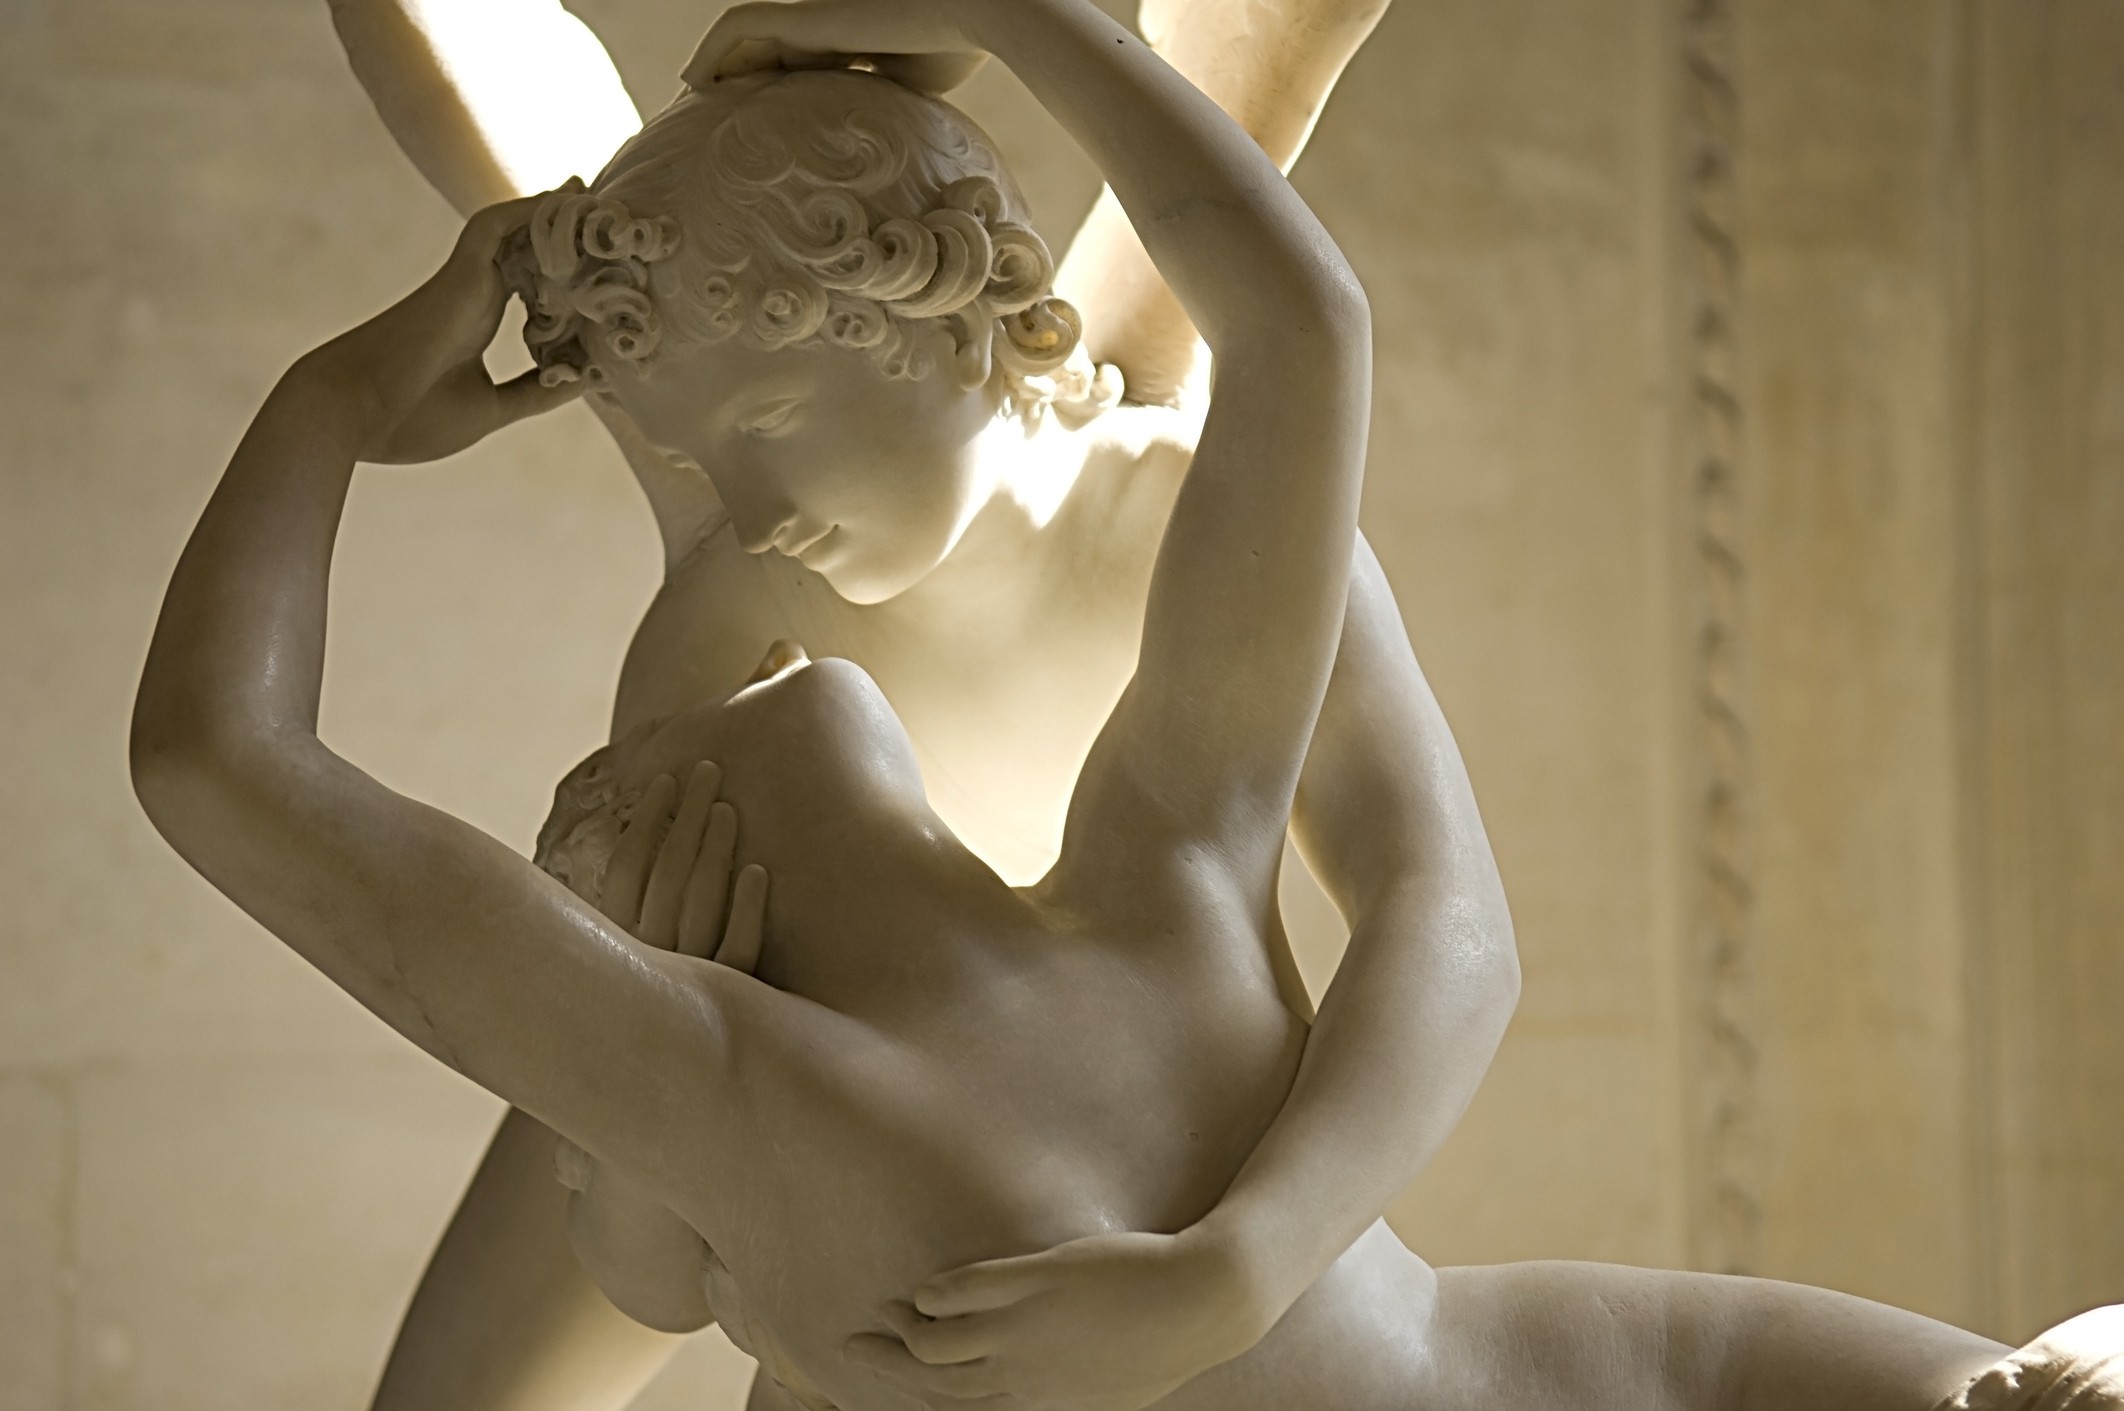 marble sculpture "Cupid and Psyche" by Antonio Canova, shows moment of awakening Psyche from the kiss of the god Cupid 1787 (Foto: Getty Images/iStockphoto)